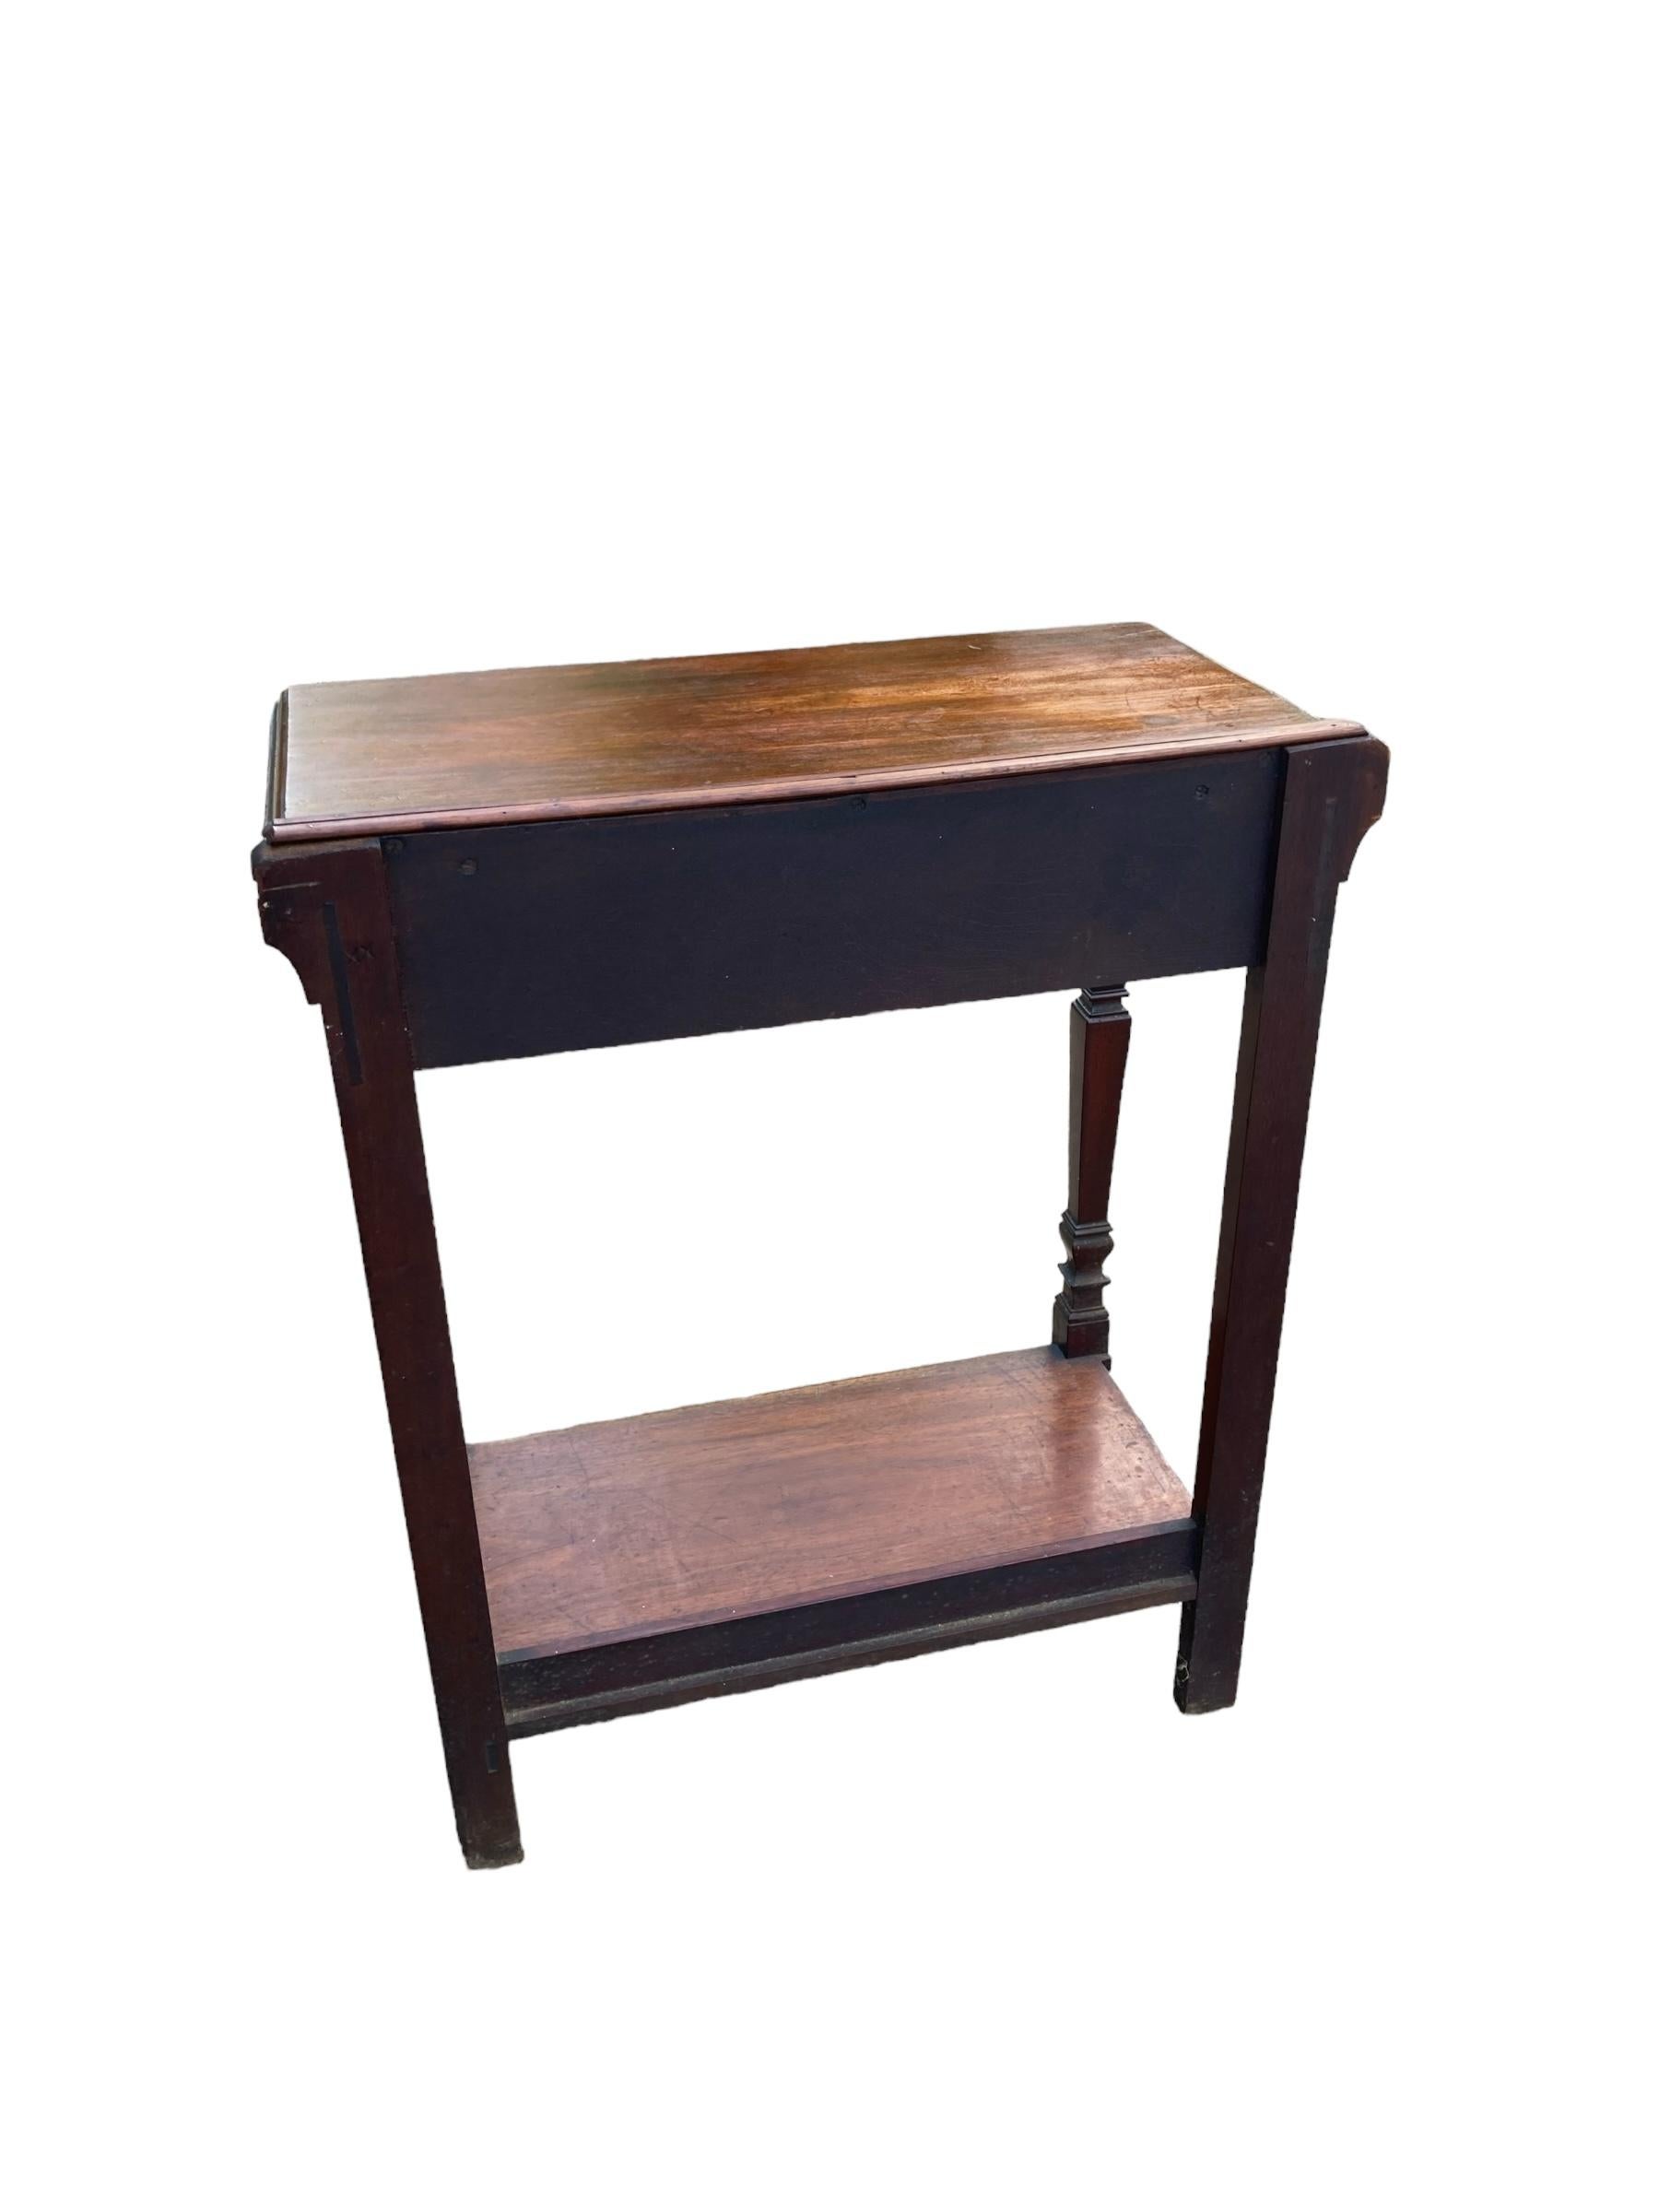 Mahogany Victorian Single Drawer Console table or Hall Table, Deep mahogany in colour, single brass handle with practical bottom shelf.

Whether it's Antique, Art Deco, Mid Century or late 20th Century we choose quality items for the period which